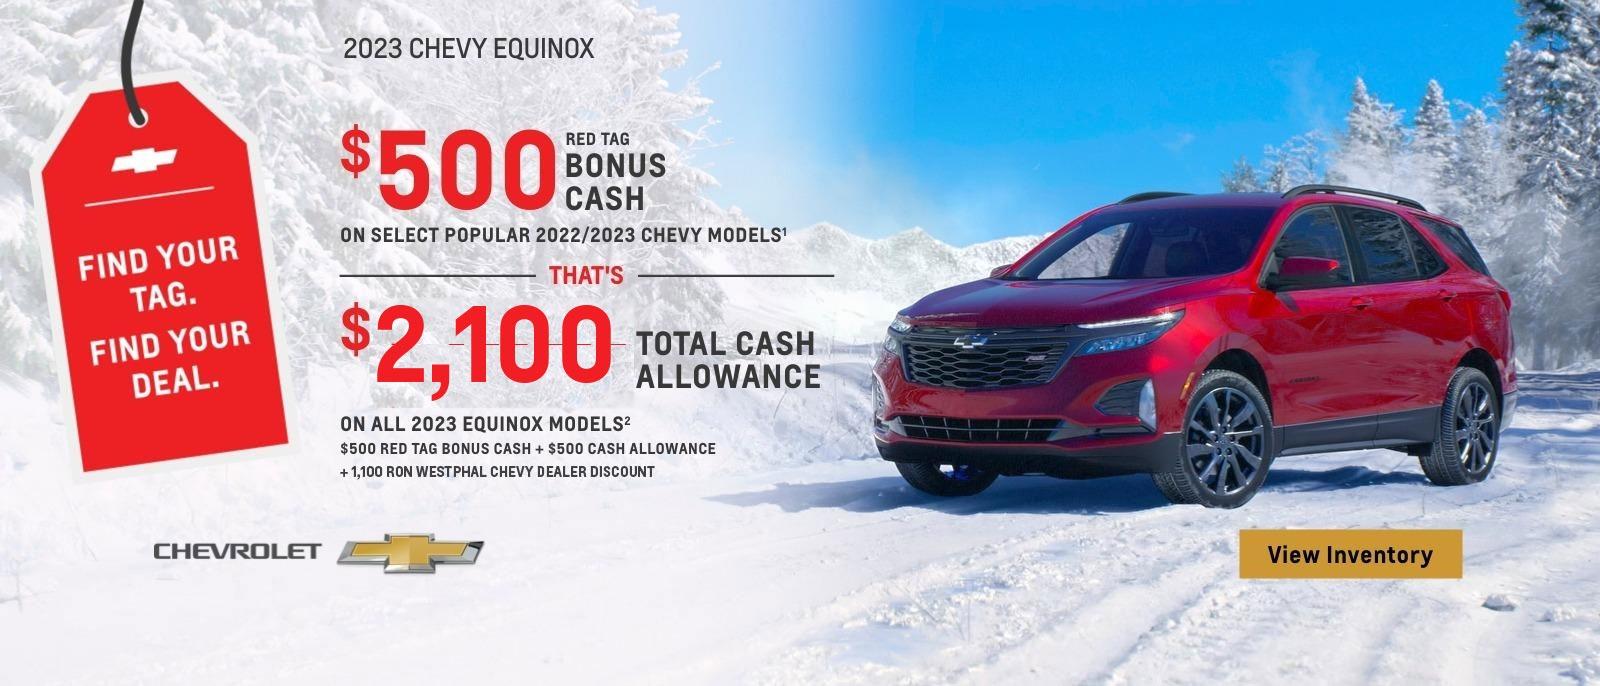 $500 Red Tag Bonus Cash on select popular 2022/2023 Chevy models. That's $2,100 total cash allowance on all 2023 Equinox models. $500 Red Tag Bonus Cash + $1,000 Cash Allowance.